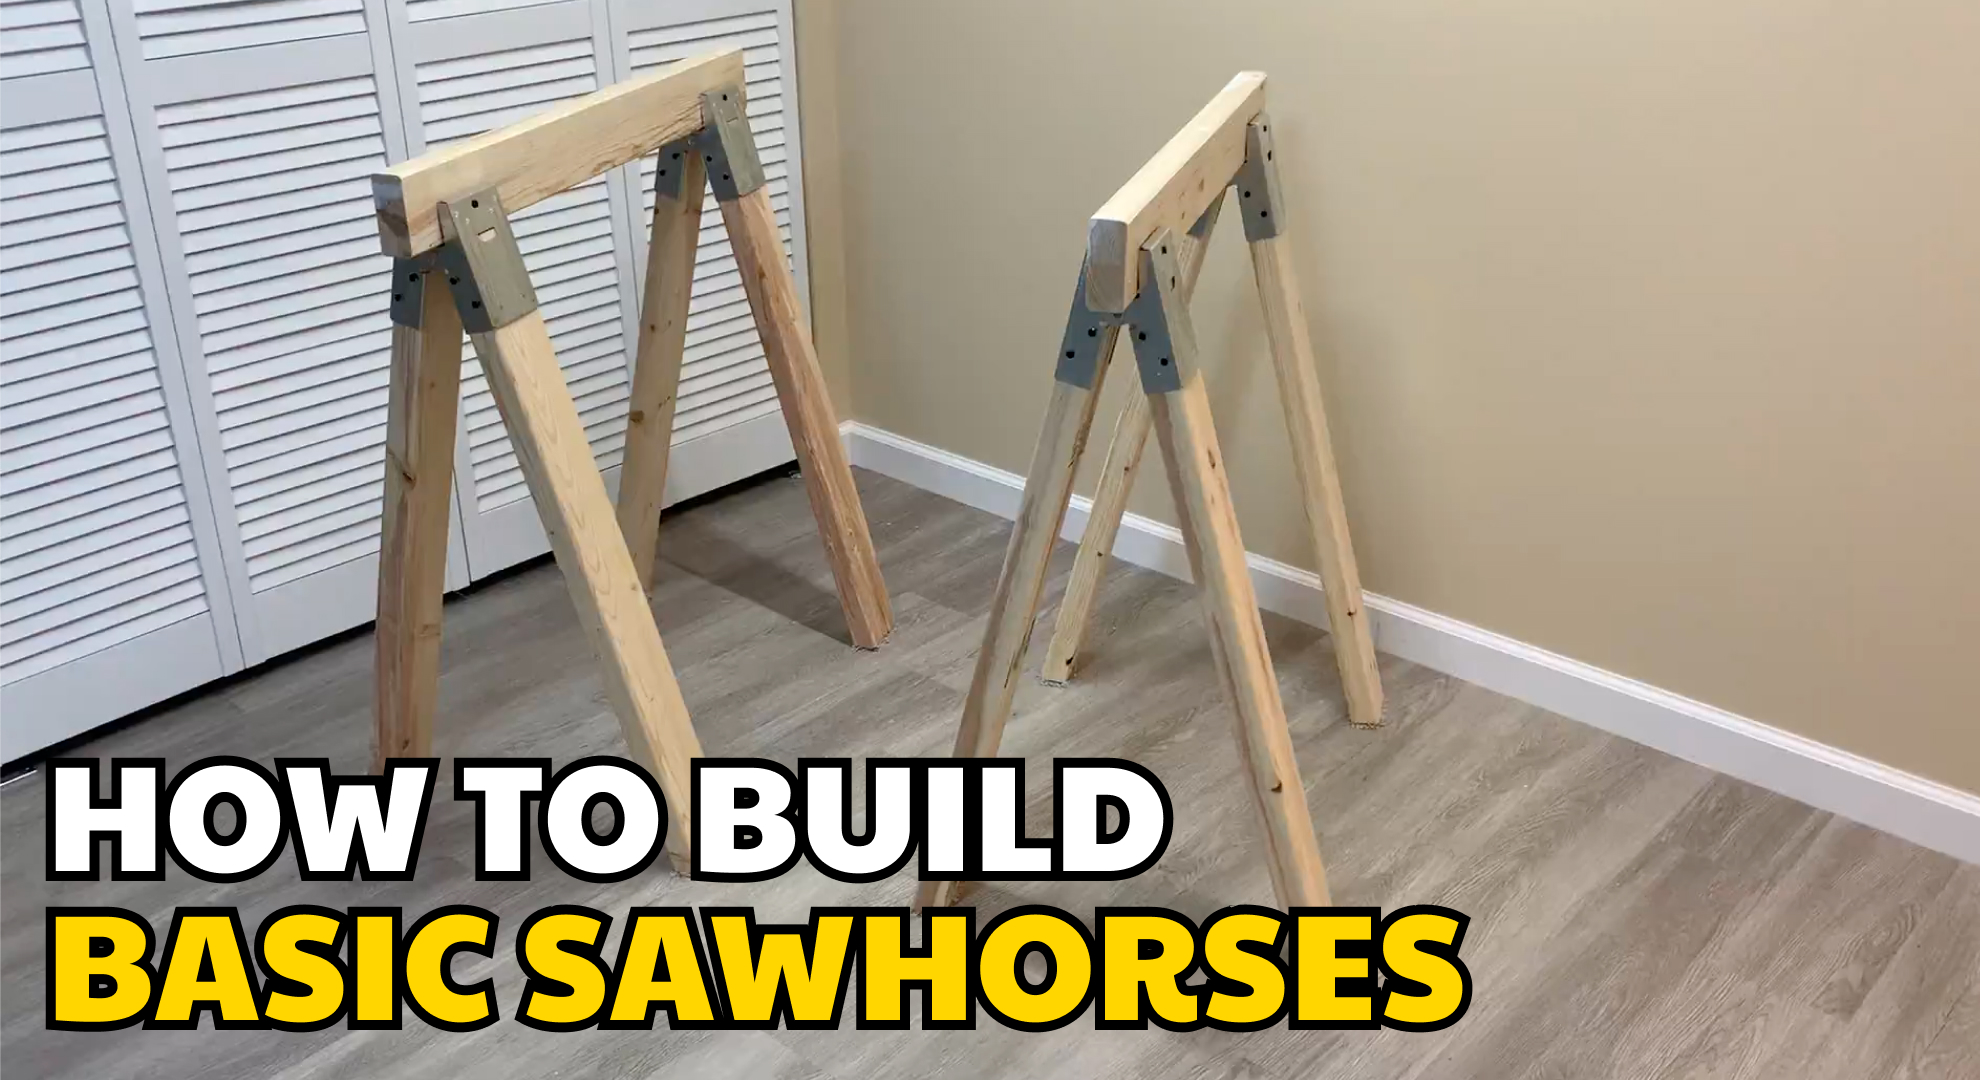 Building Sawhorses from 2x4 lumber and HDX metal brackets